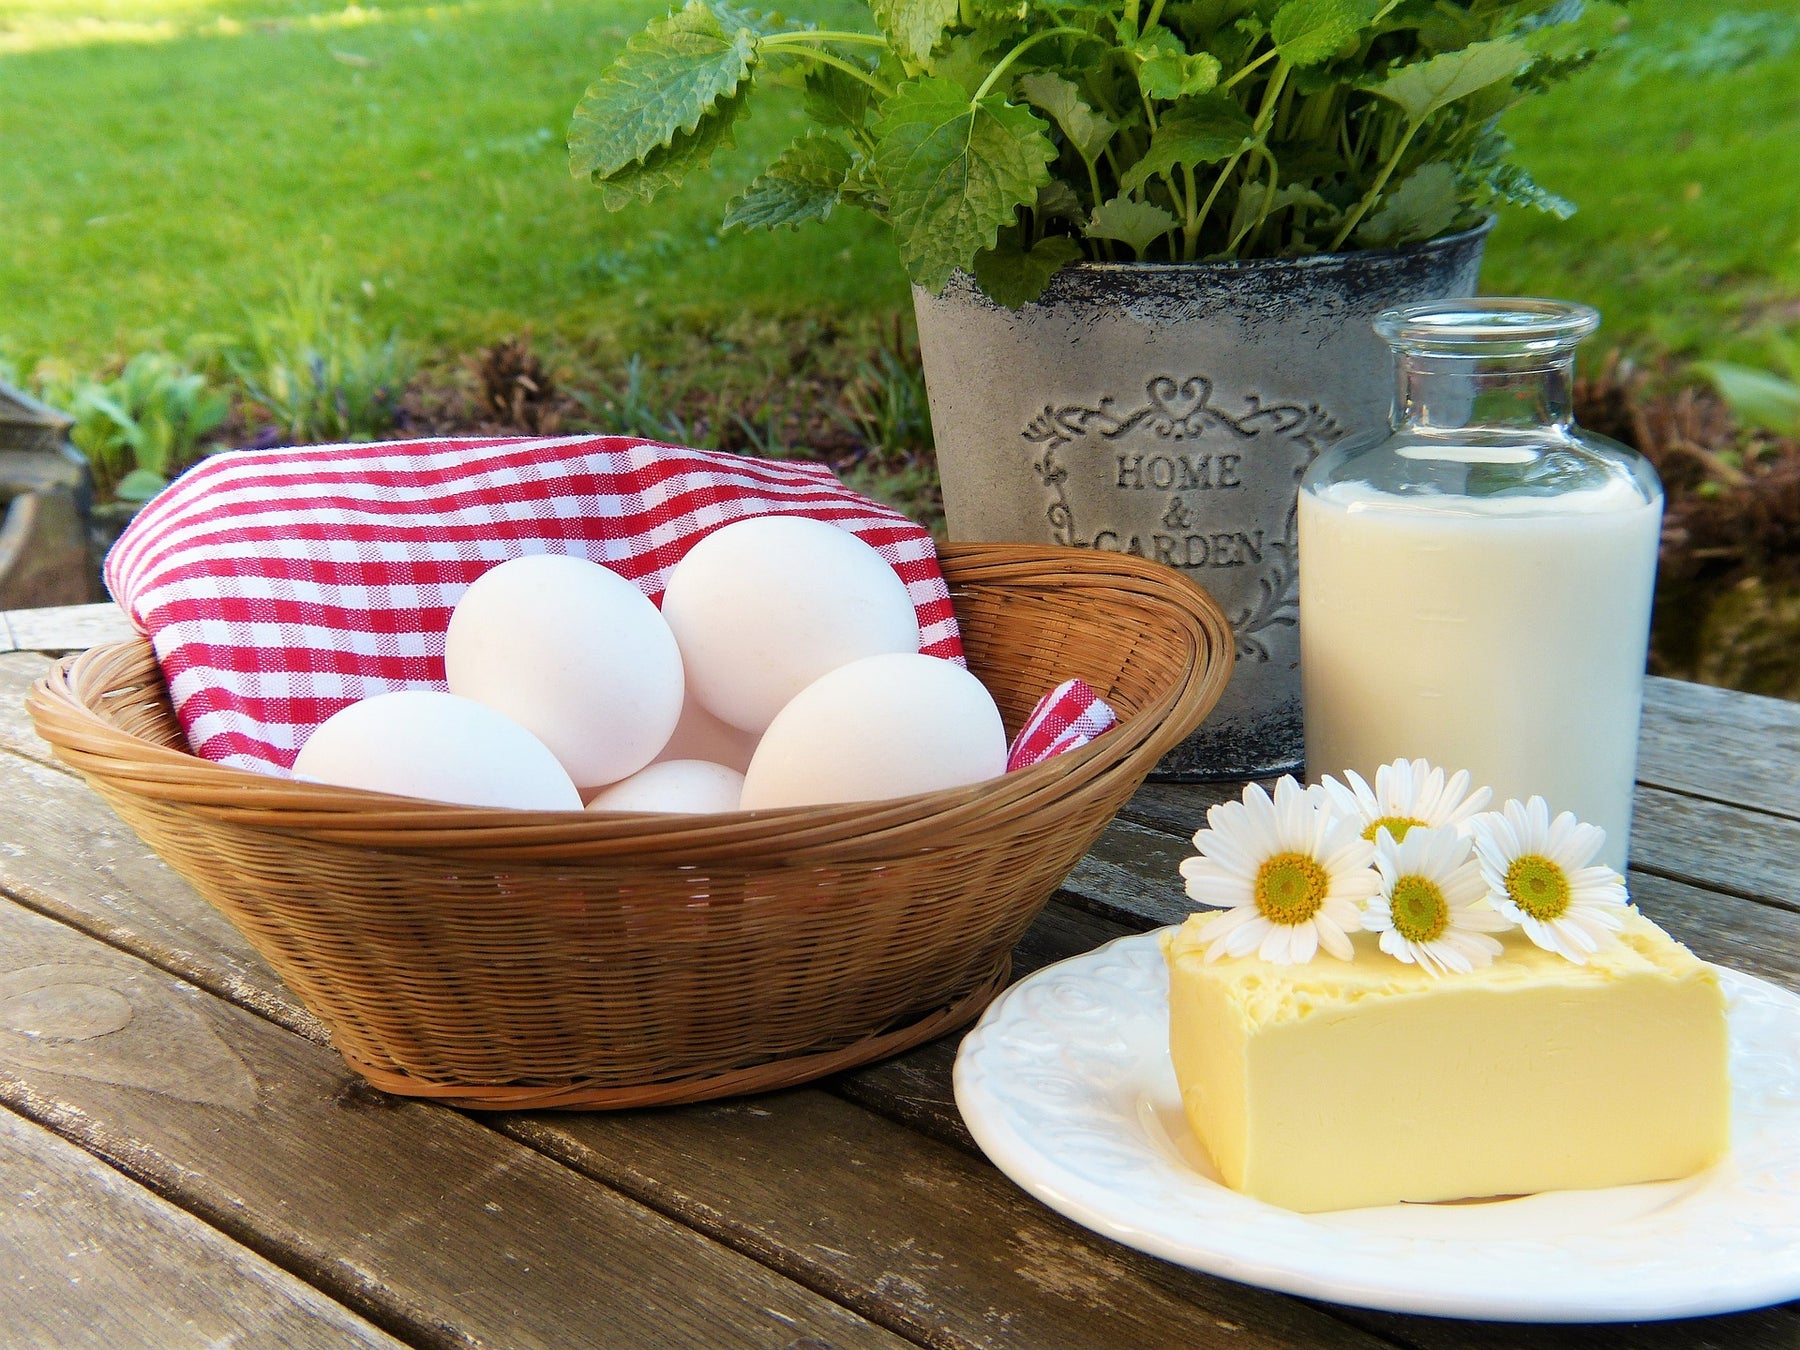 Eggs, cheese and milk on a wooden table